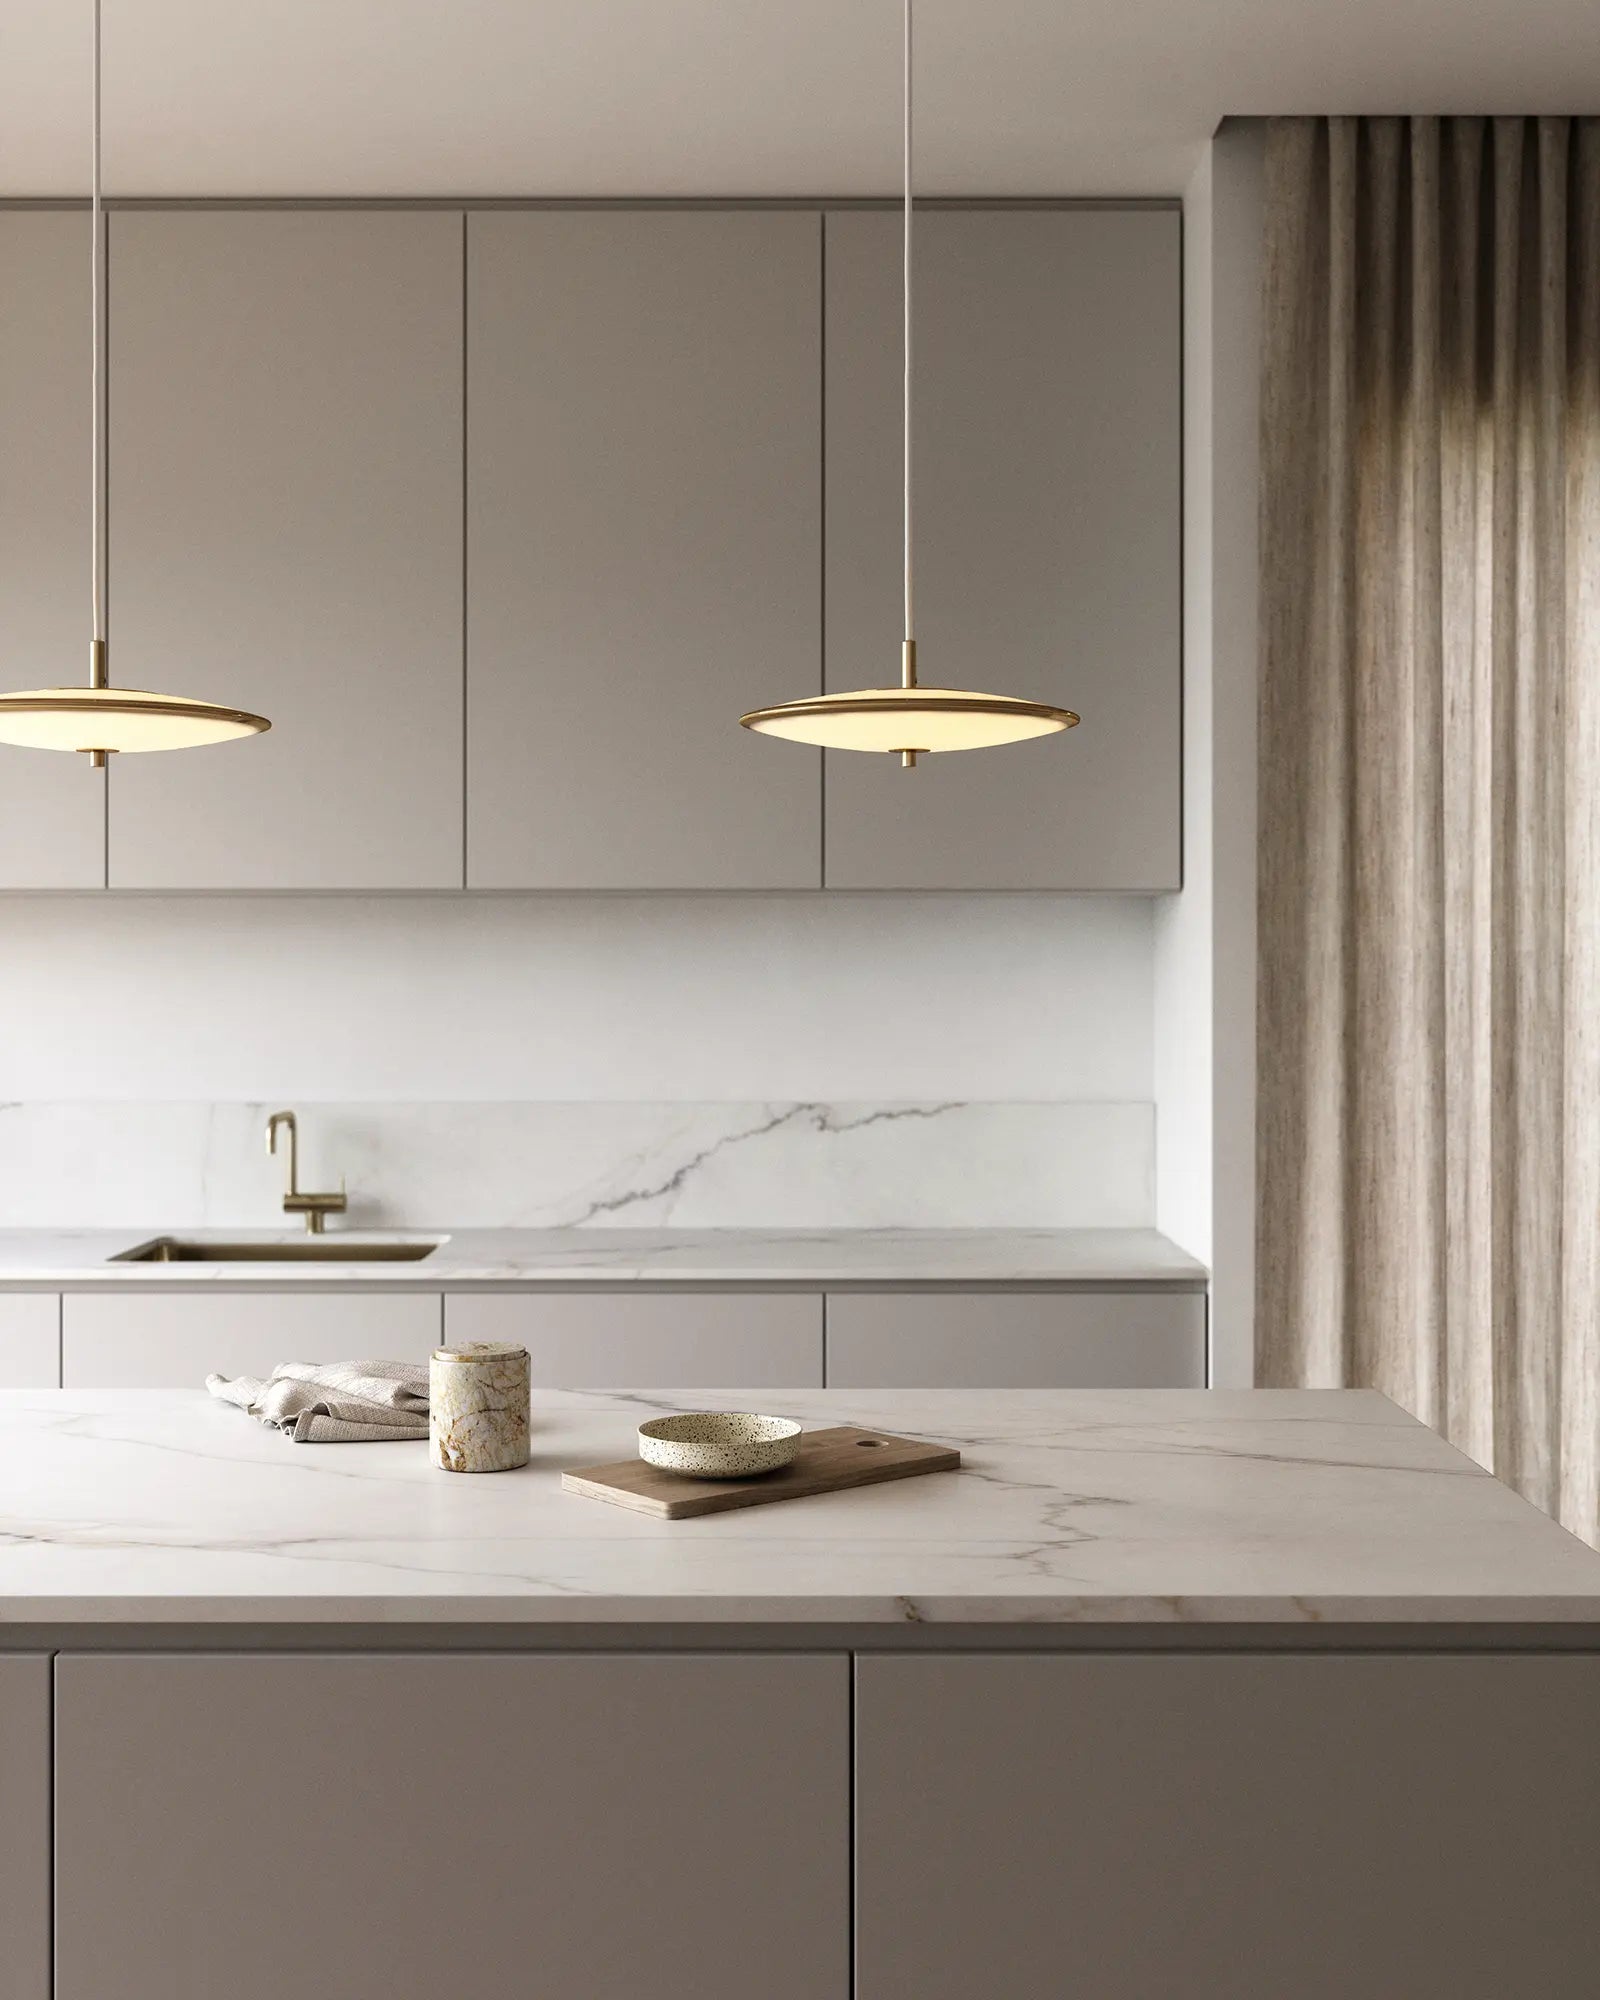 Blanche pendant light cluster over a kitchen island